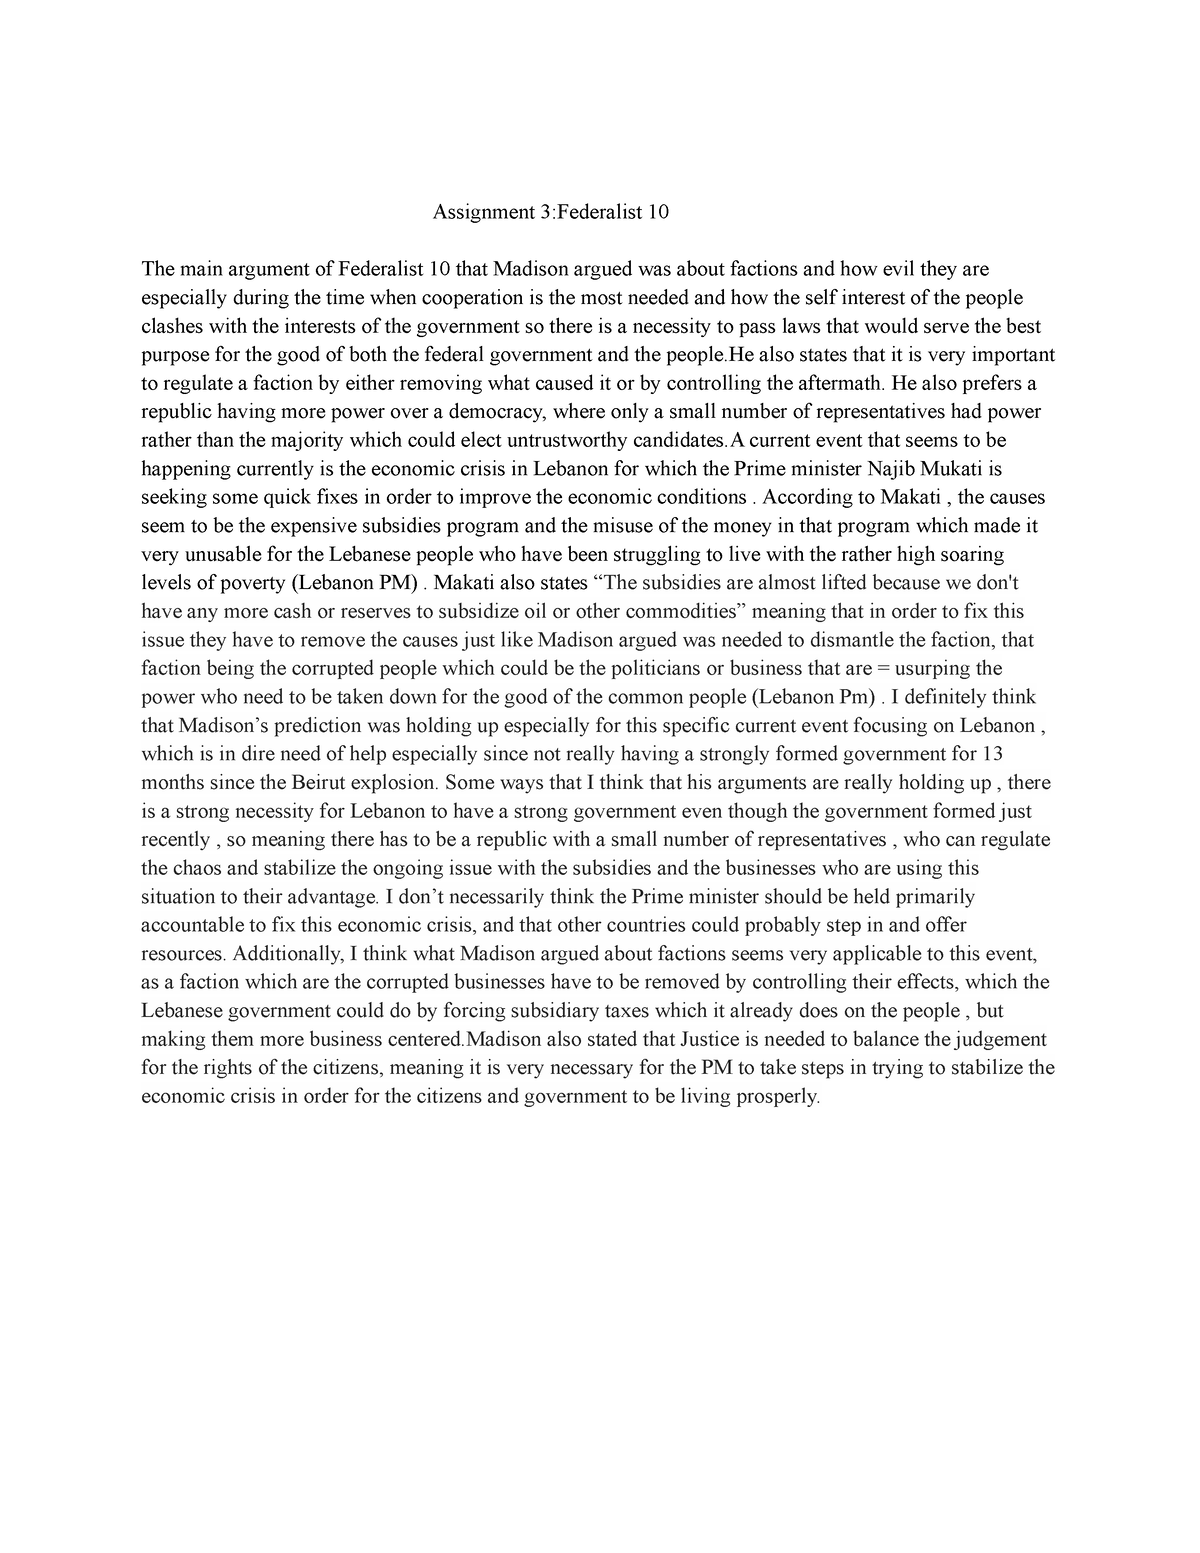 the federalist papers summary and analysis of essay 10